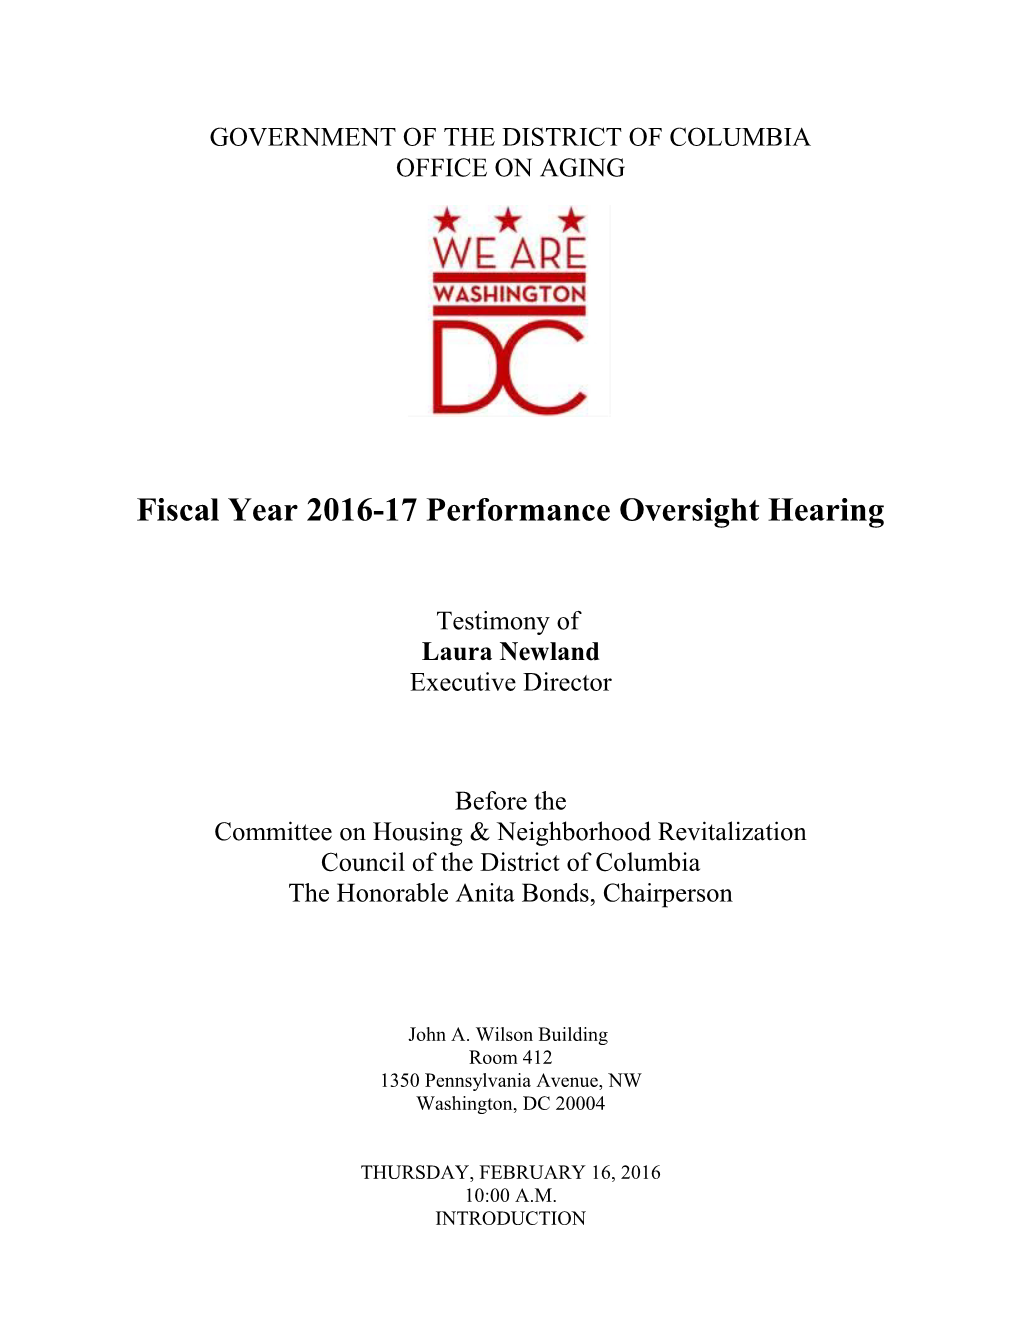 Fiscal Year 2016-17 Performance Oversight Hearing